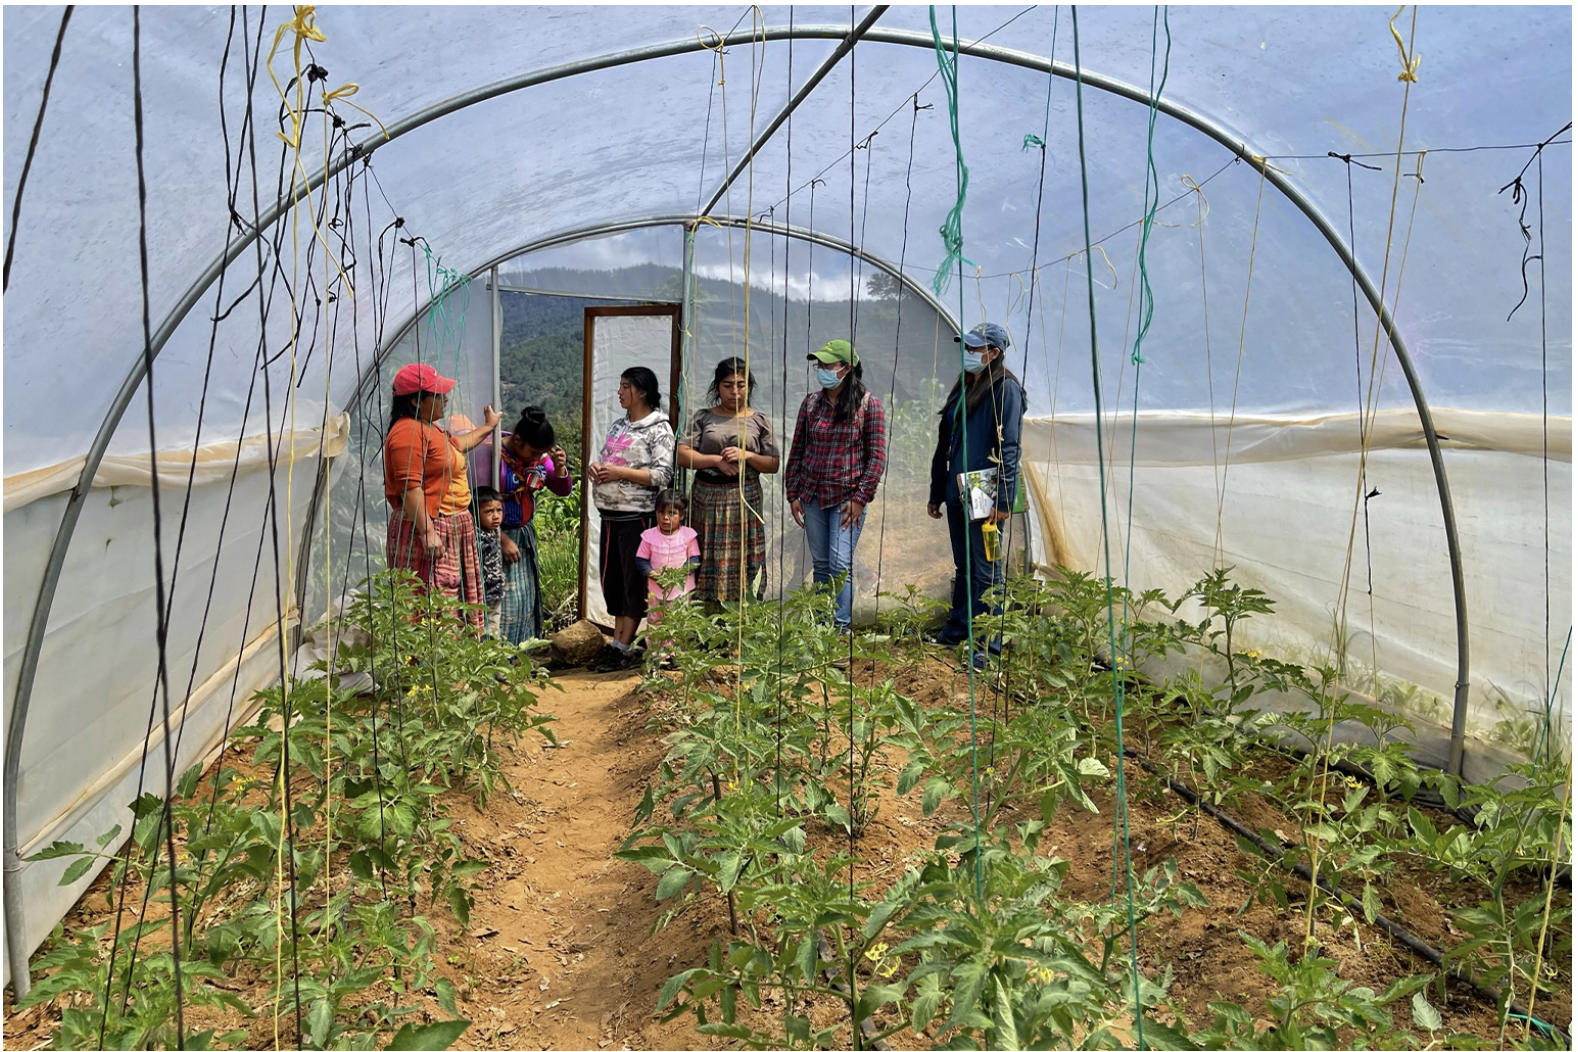 ‘Learning by doing’ is one of the guiding principles of Guatemala’s agroecology schools. Although some schools have theoretical elements, most lessons take place on farms, rather than classrooms. Image courtesy of Utz Che’.